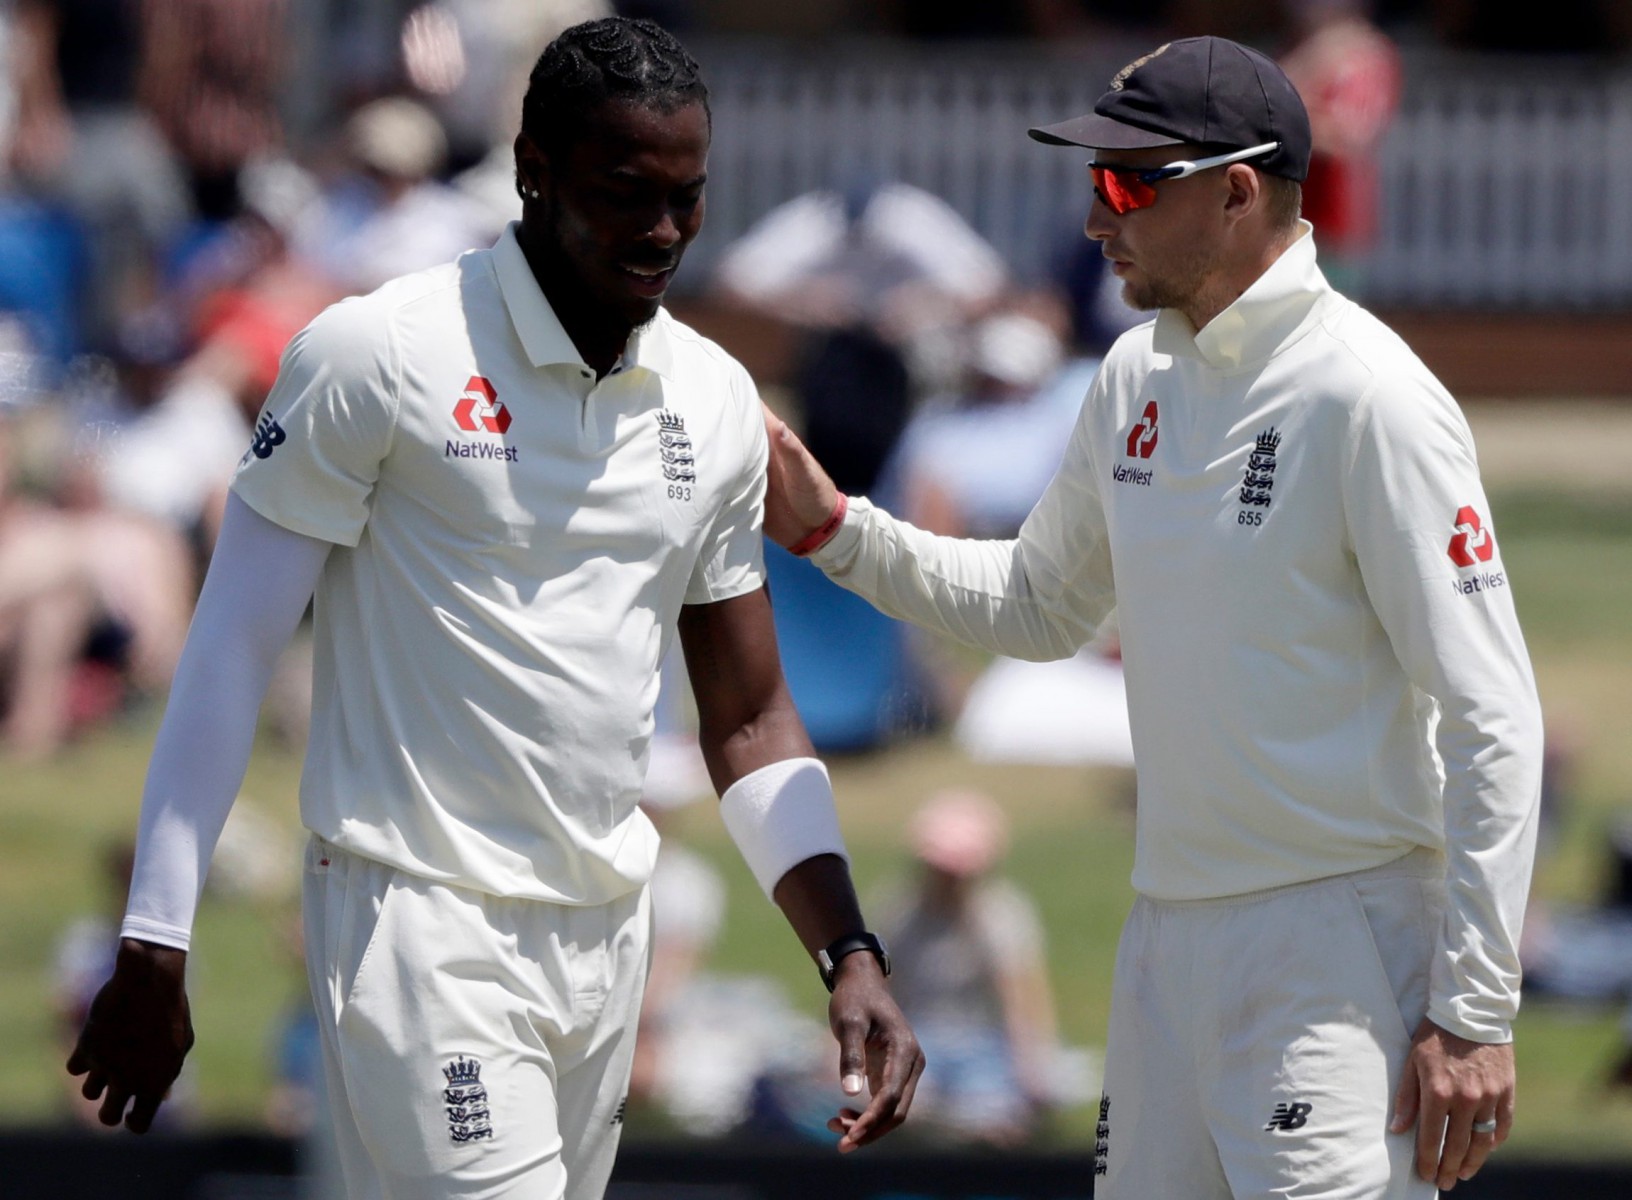 Skipper Joe Root will pay extra attention to Jofra Archer over the next 24 hours to make sure he is in the best frame of mind